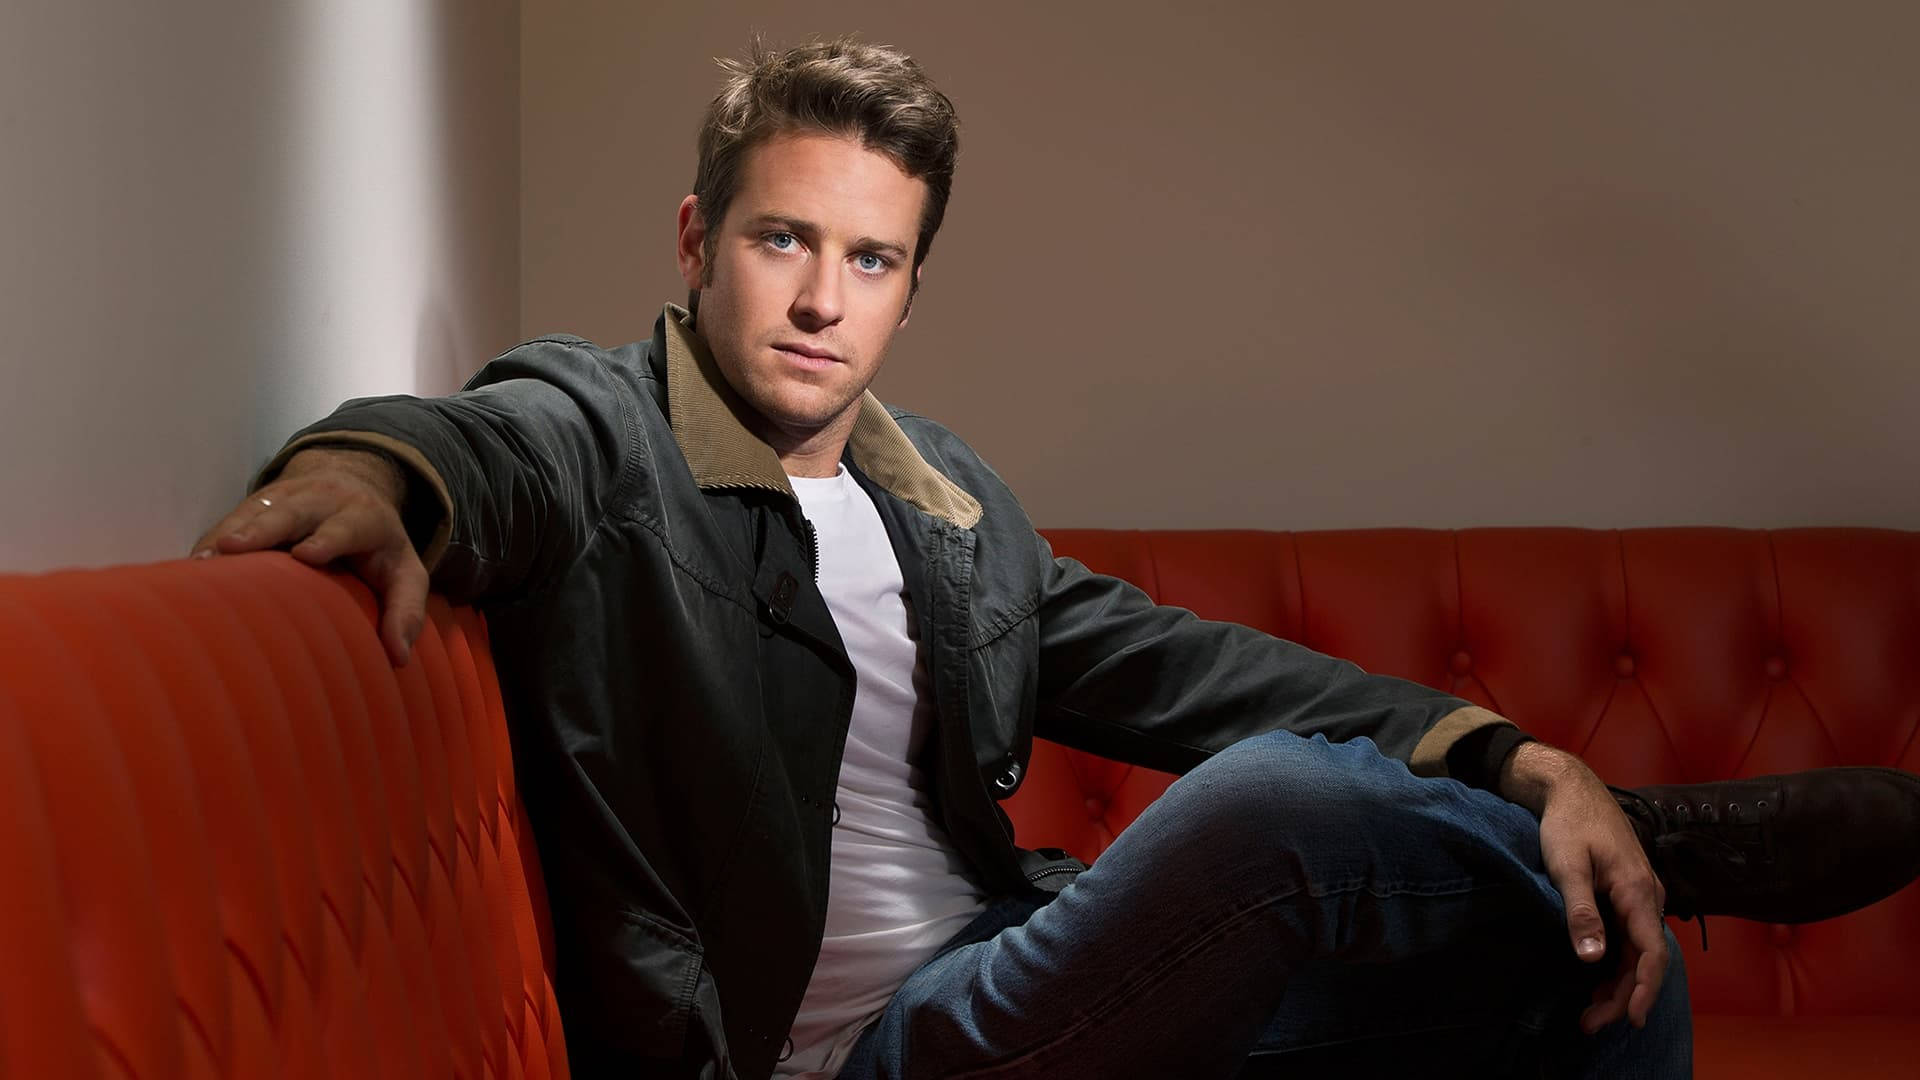 Armie Hammer At Orange Couch Wallpaper